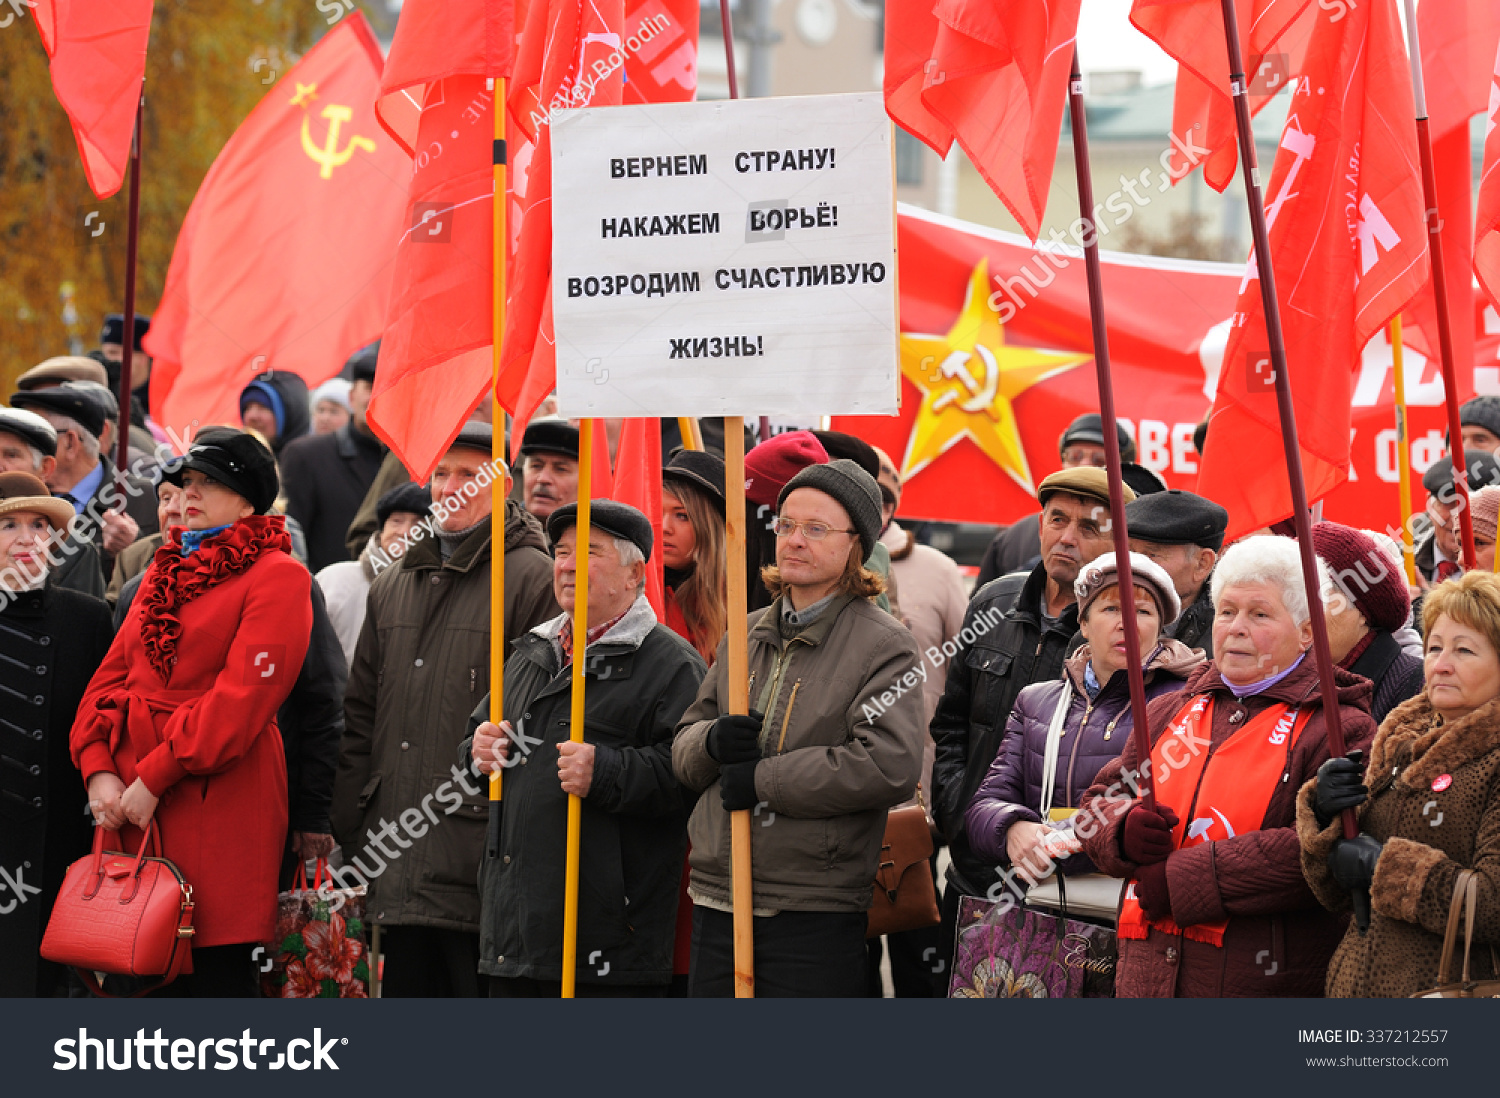 Orel, Russia - November 7, 2015: Communist party meeting. People with banners and red flags.